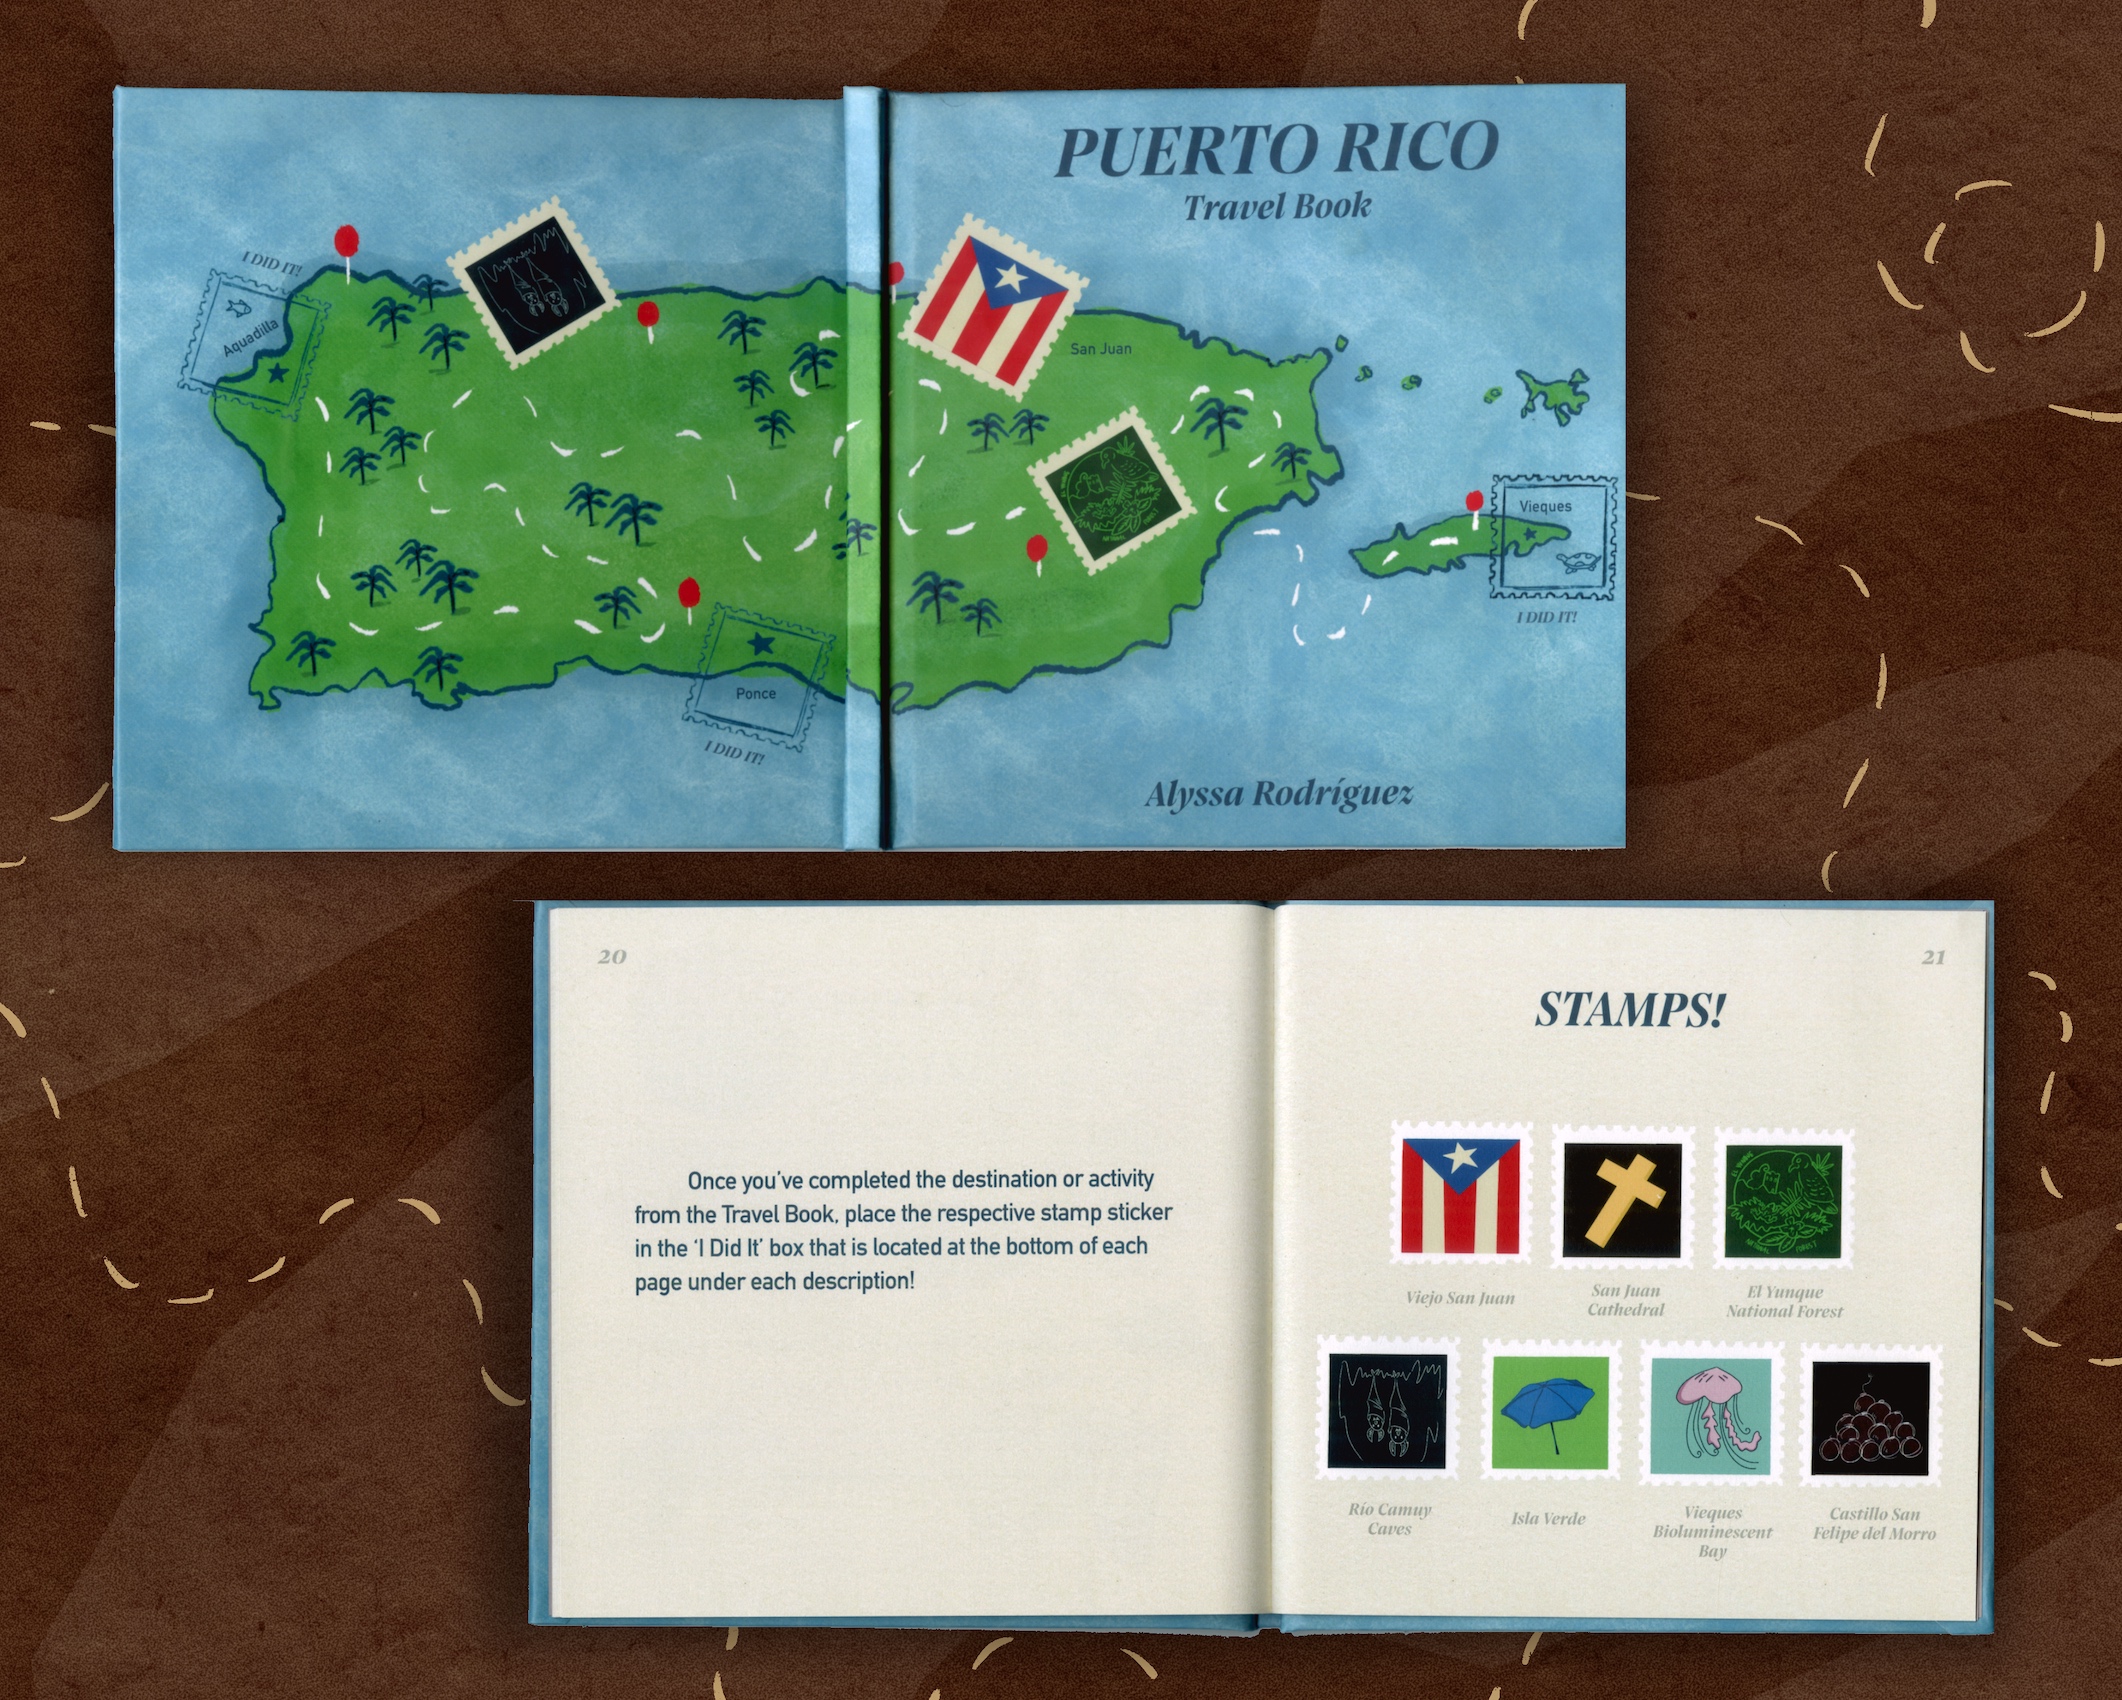 Puerto Rico Travel Book Covers and Spread